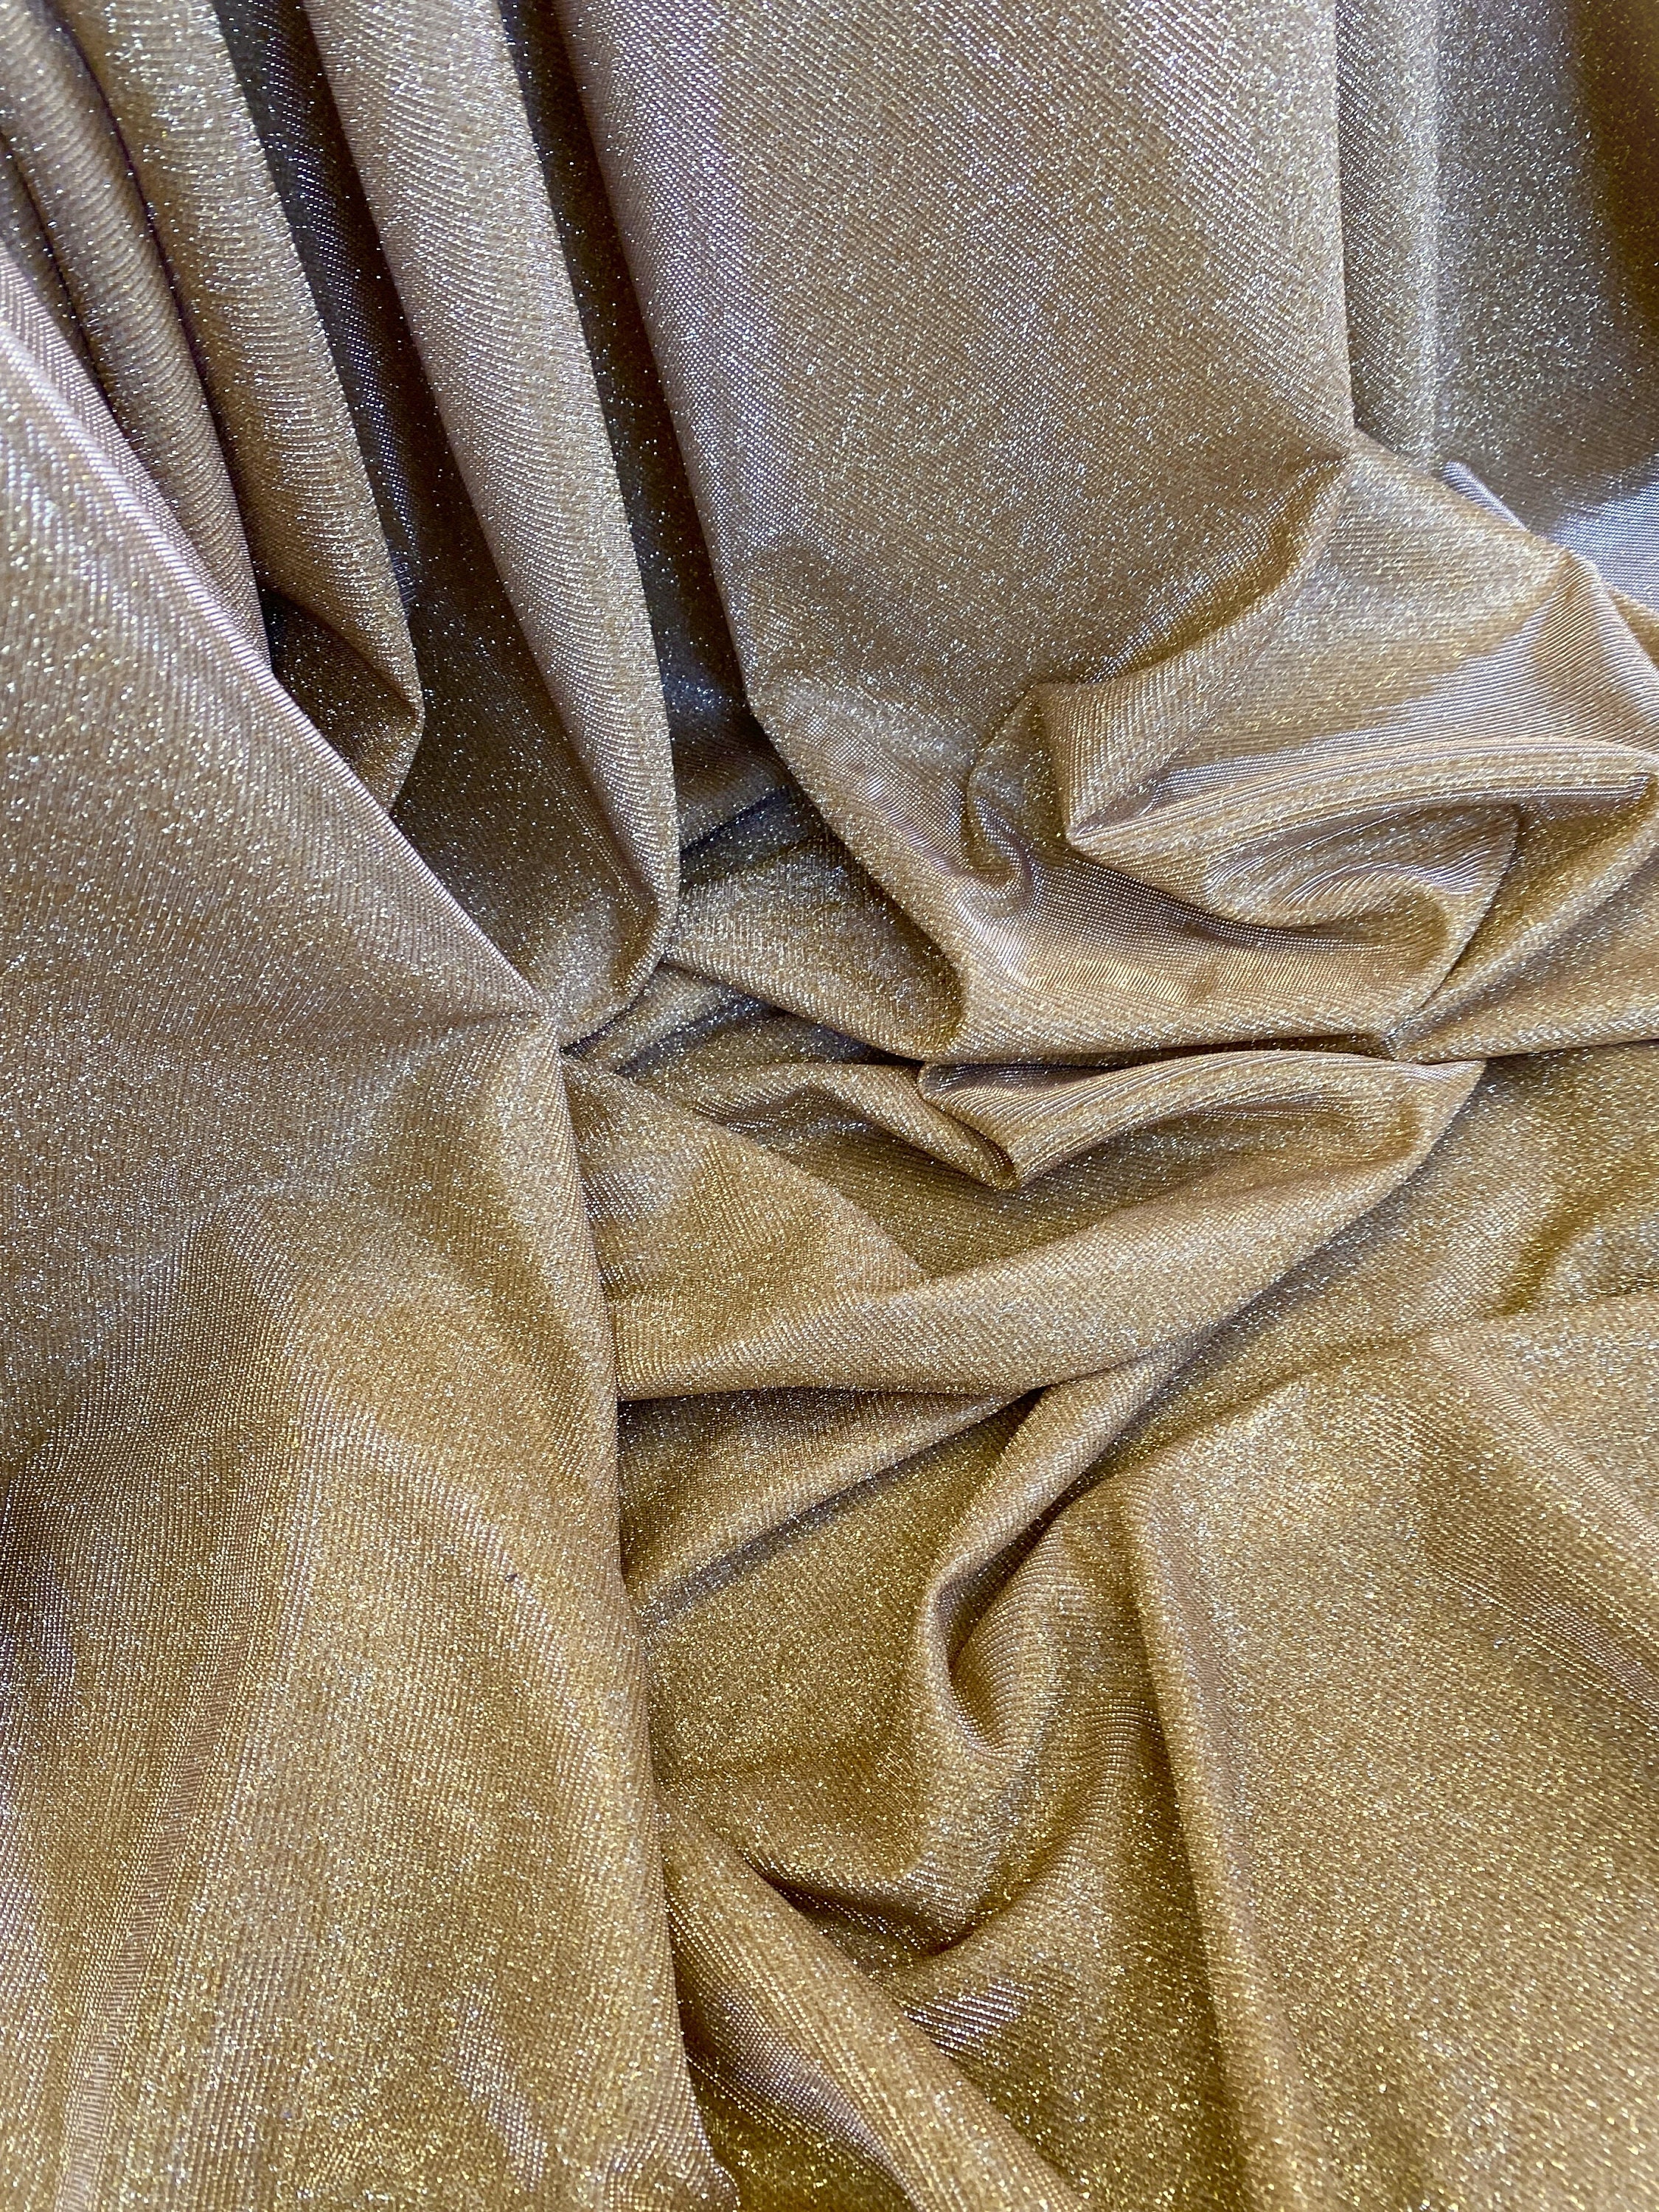 Gold Lurex Glitter Fabric/ Glimmer/ Gold Shimmer Fabric, Gold Glitter  Fabric for Gown, Backdrop, Drapes by Yard, Luxury Sparkle Fabric 